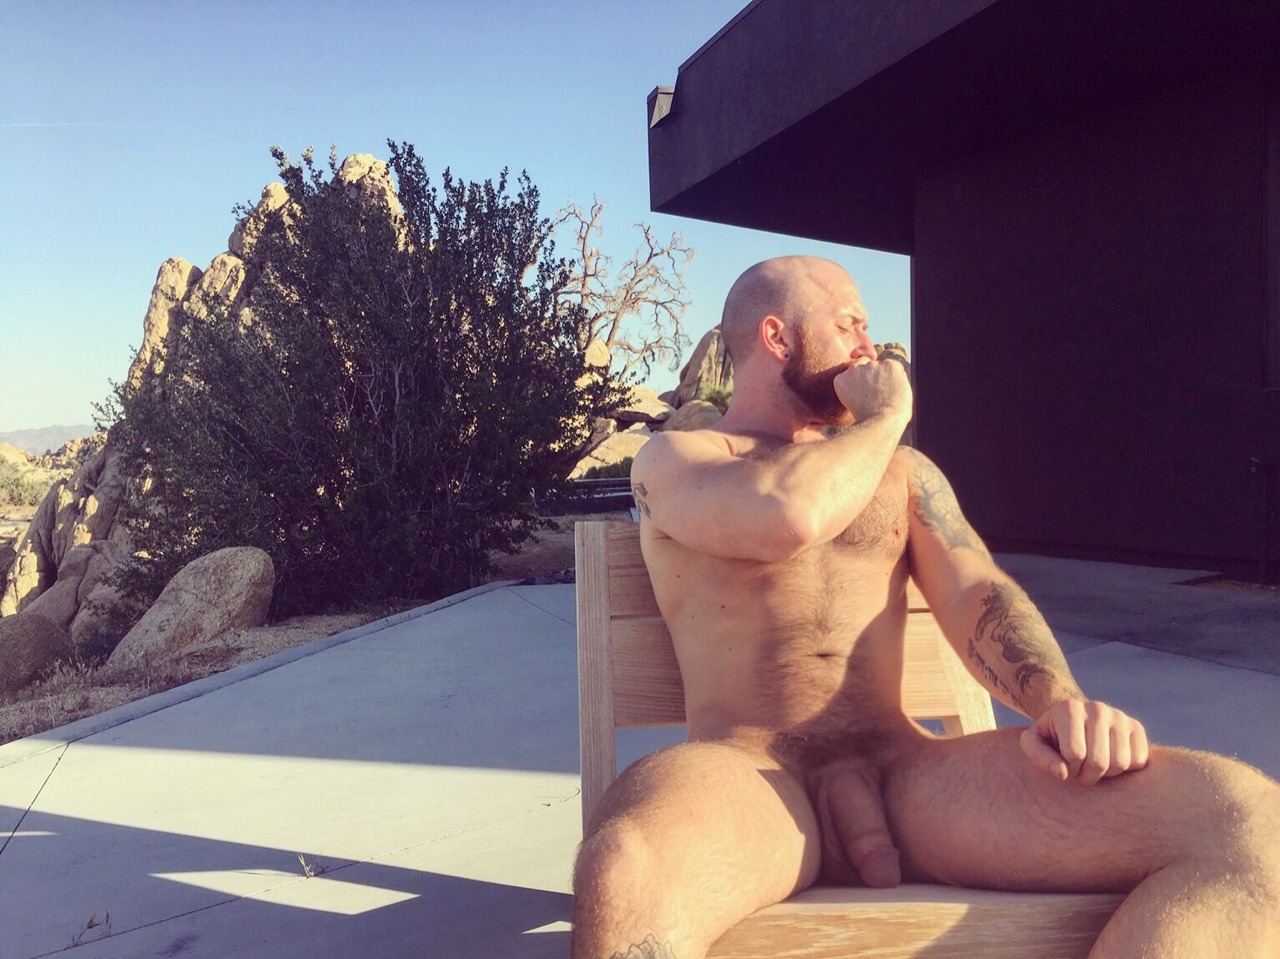 nigelmarch:
“Naked, smoking a j in the desert ❤️
”